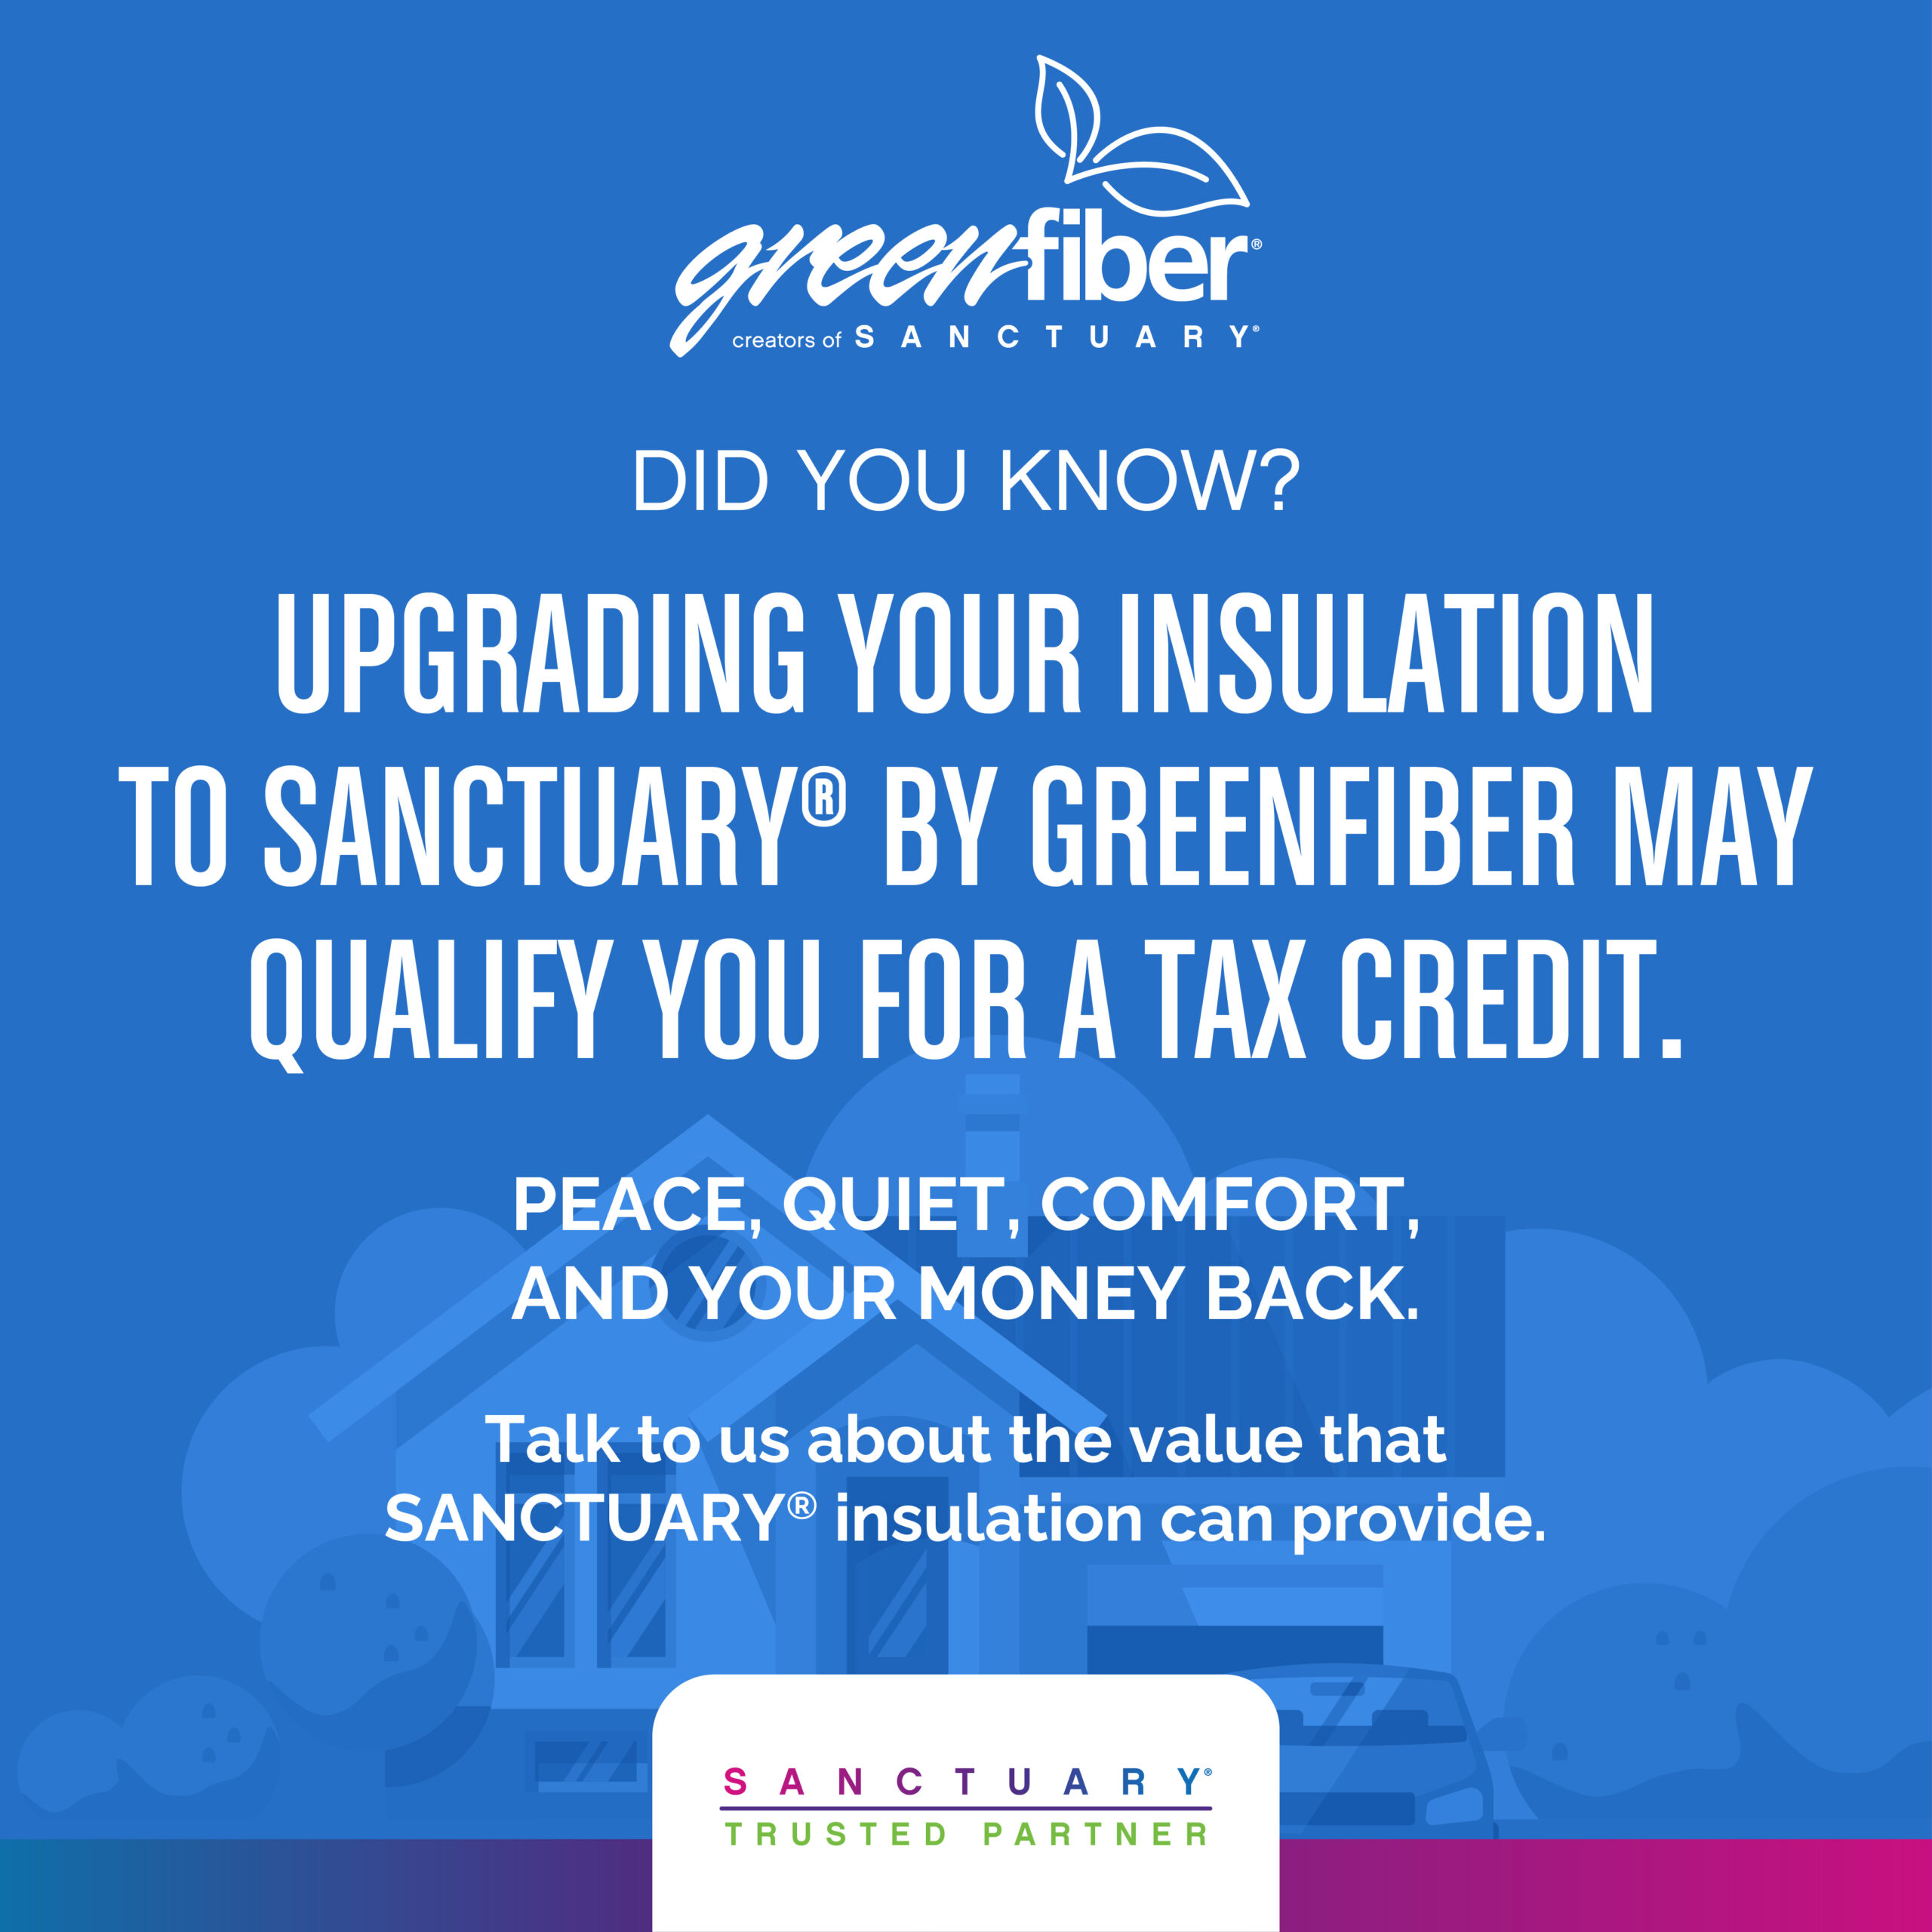 "Greenfiber creators of Sanctuary. Did you know? Upgrading your insulation to sanctuary by greenfiber may qualify you for a tax credit. Peace, quiet, comfort, and your money back. Talk to us about the value that sanctuary insulation can provide. Sanctuary trusted partner."